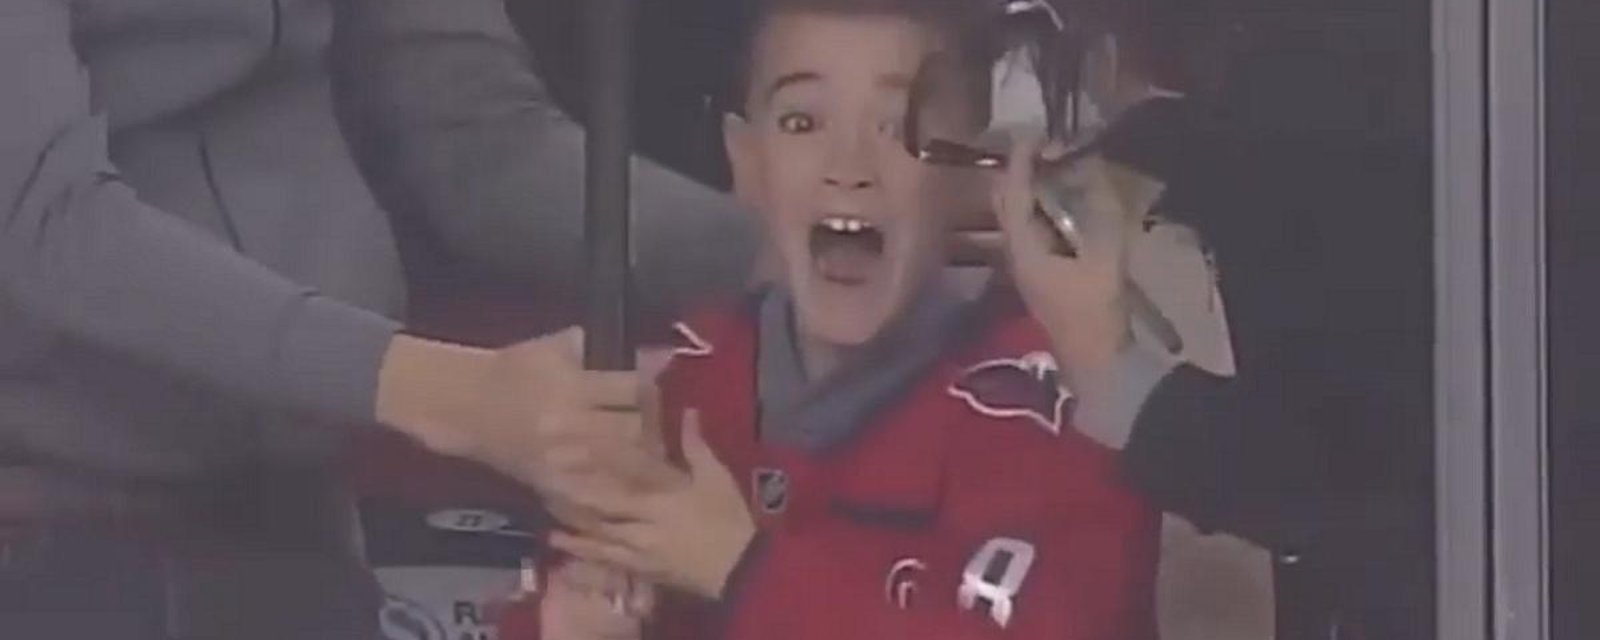 Ovechkin throws his stick over the glass and makes a young fan lose his mind.